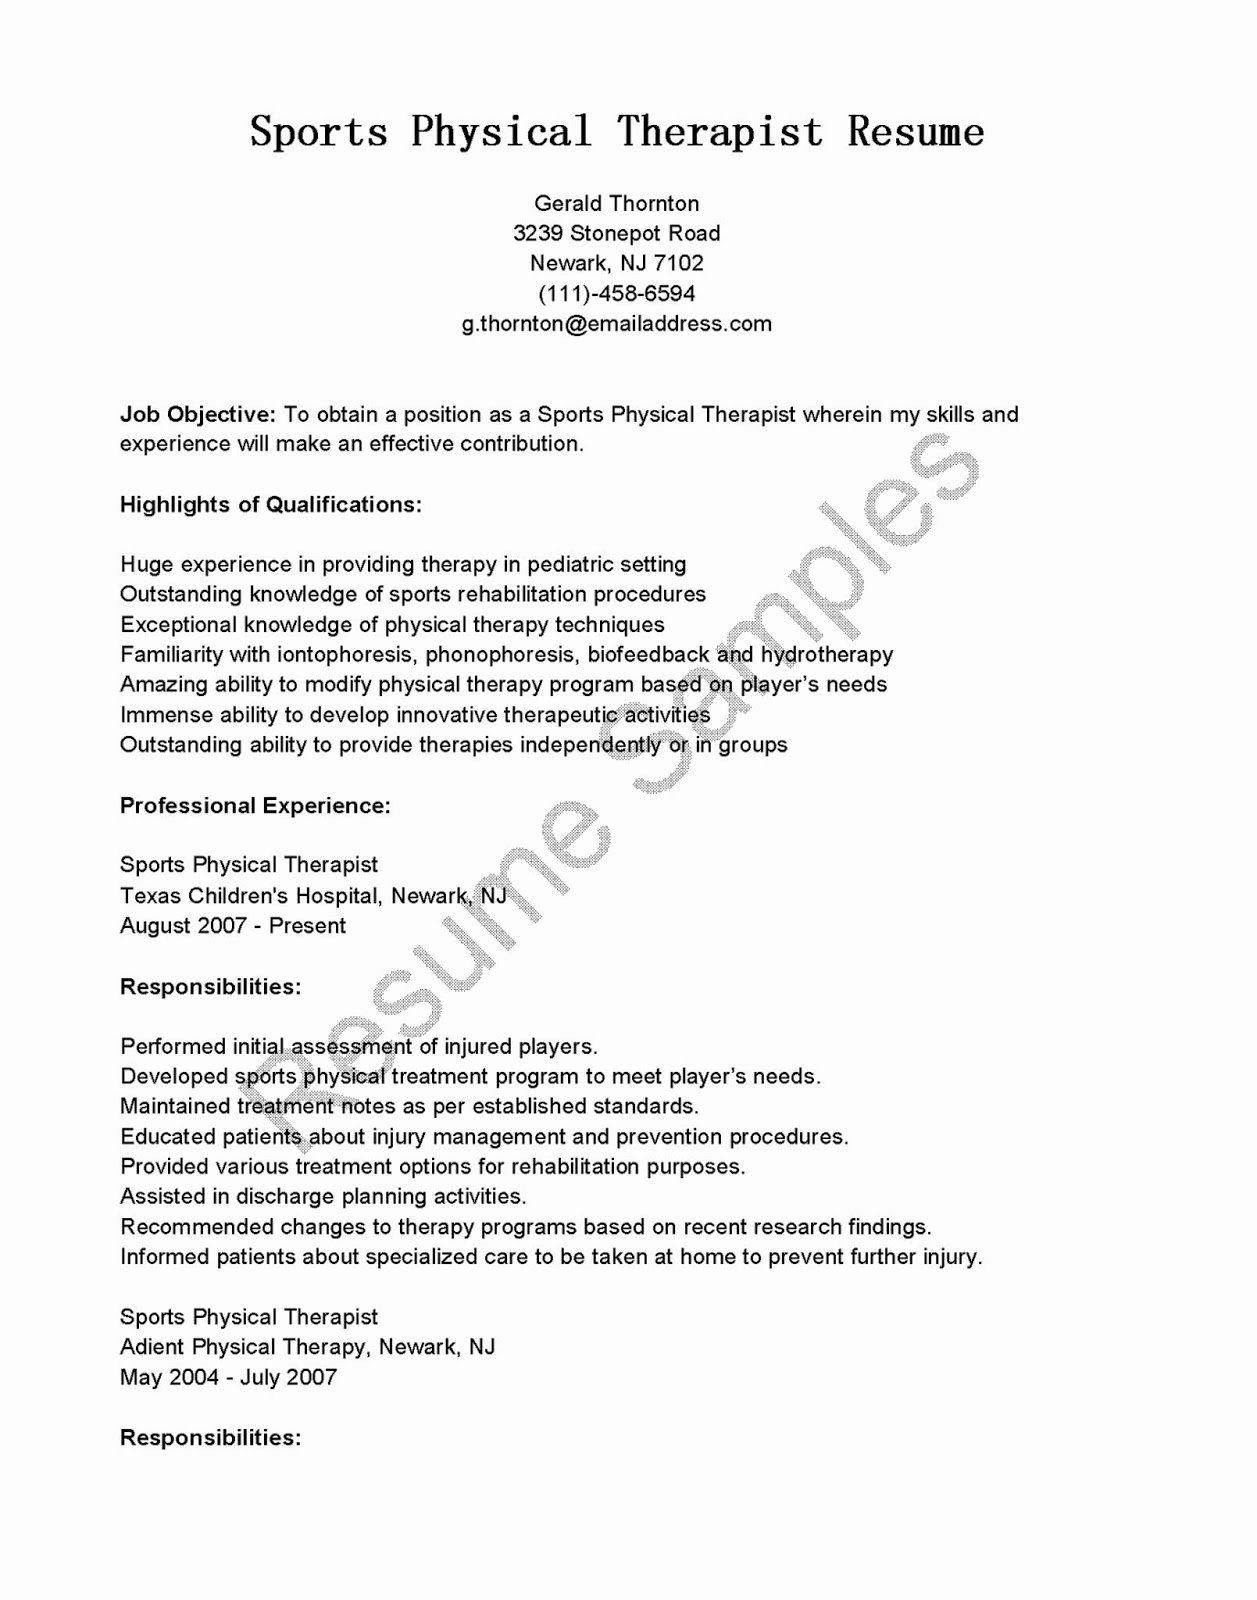 Resume Samples Sports Physical therapist Resume